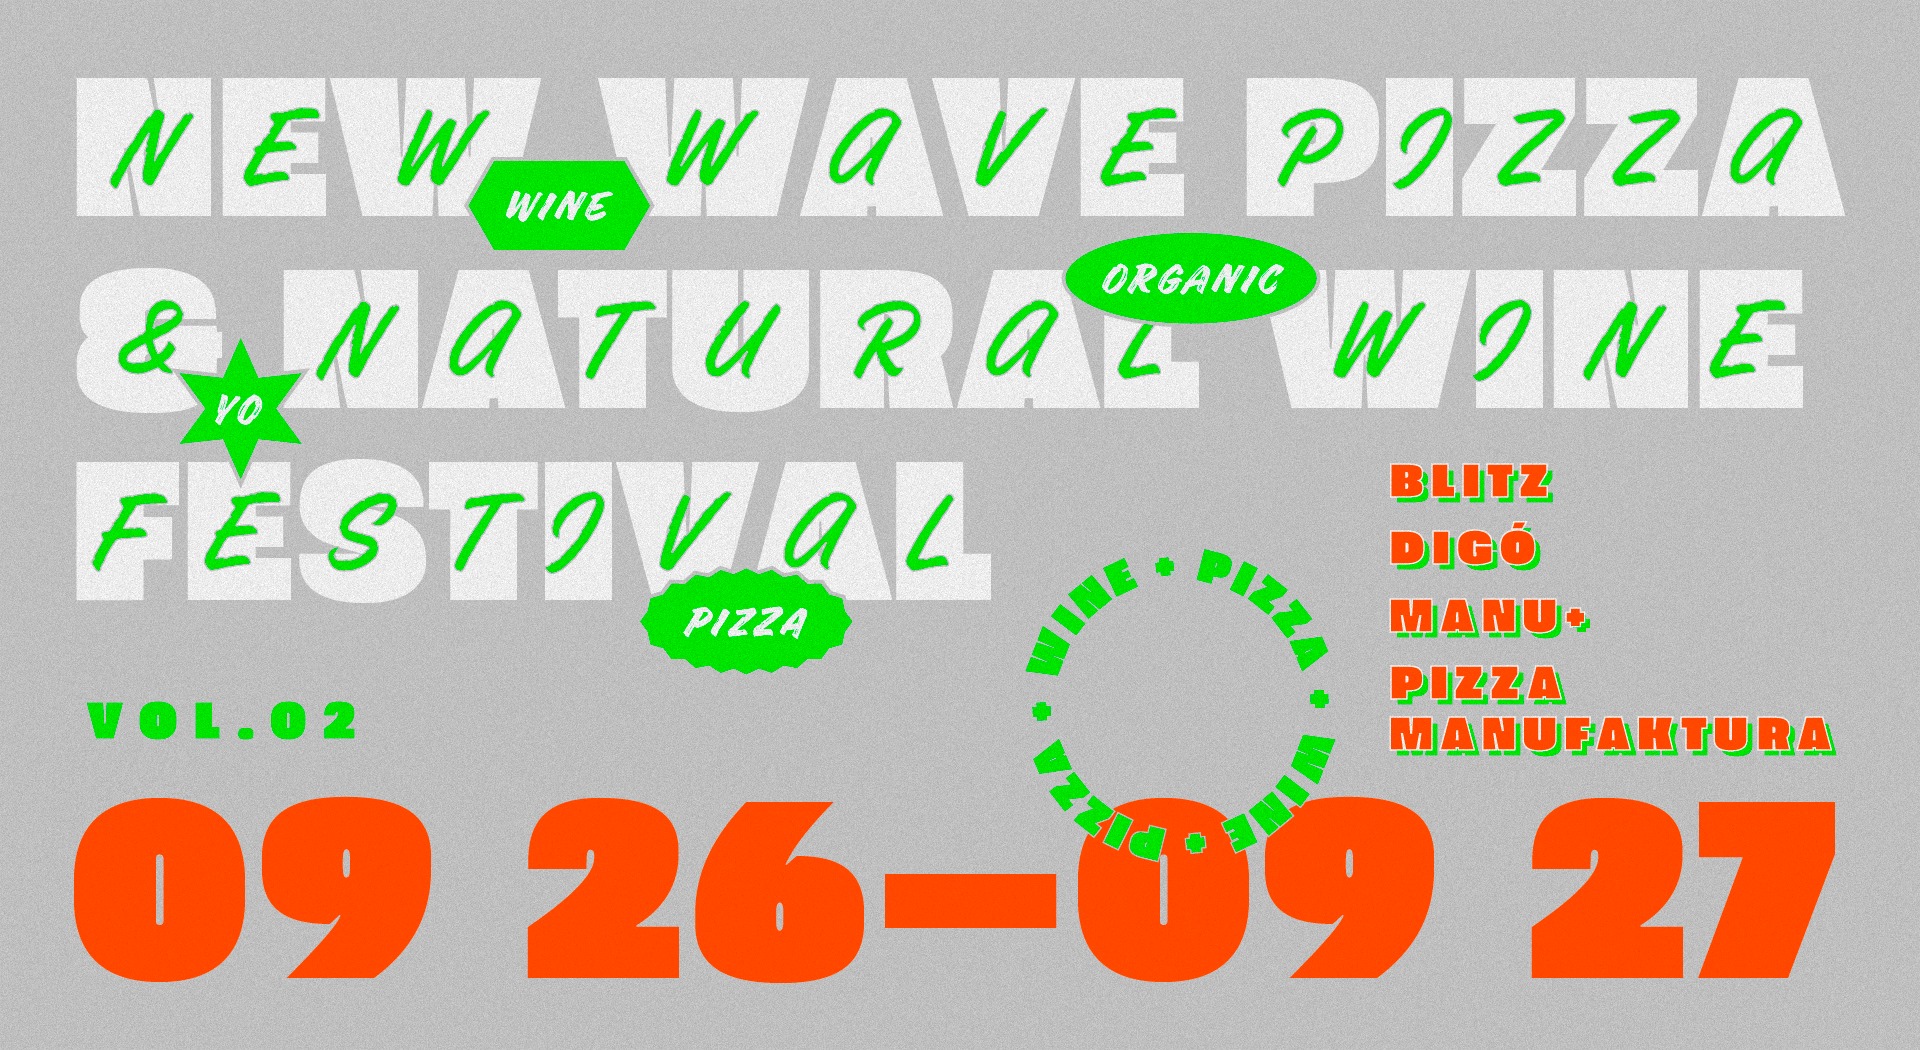 New Wave Pizza & Natural Wine Festival In Budapest, 26 – 27 September